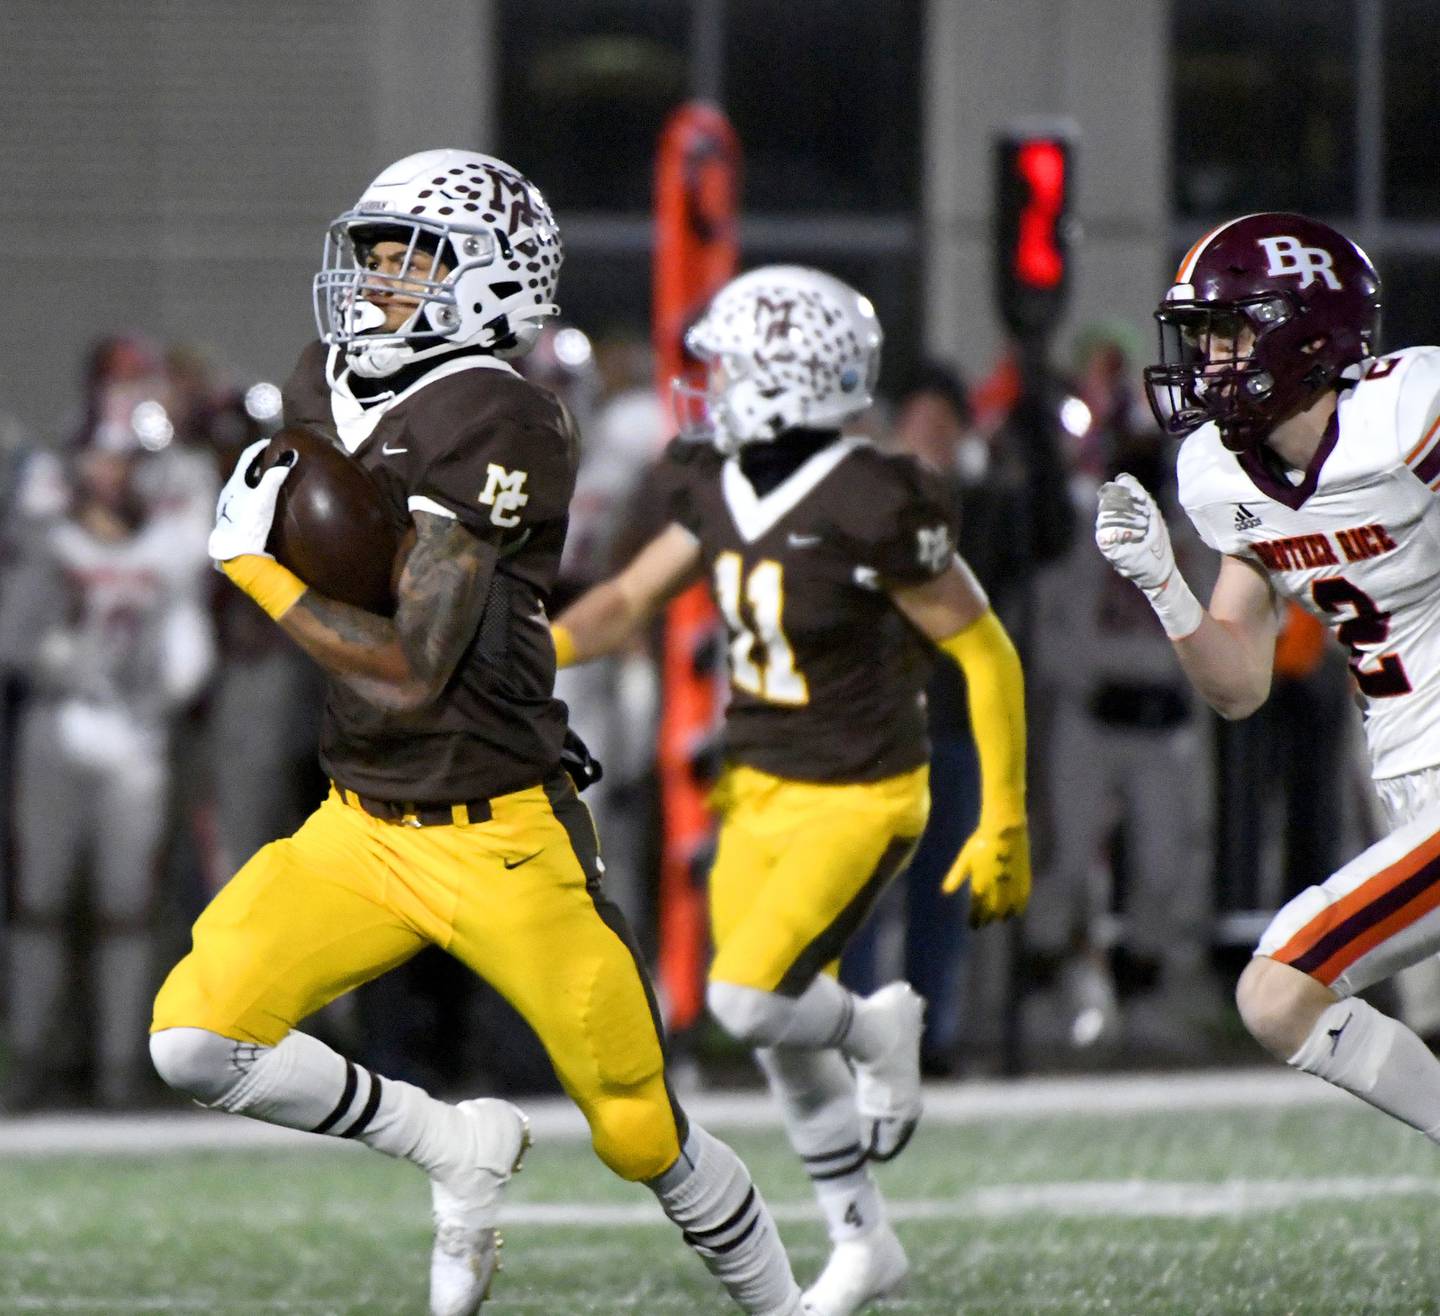 Mount Carmel's Damarion Arrington, left, heads to the end zone ahead of Brother Rice's Jack Morrison (2) during a Class 7A state quarterfinal game in Chicago on Saturday, Nov. 12, 2022.